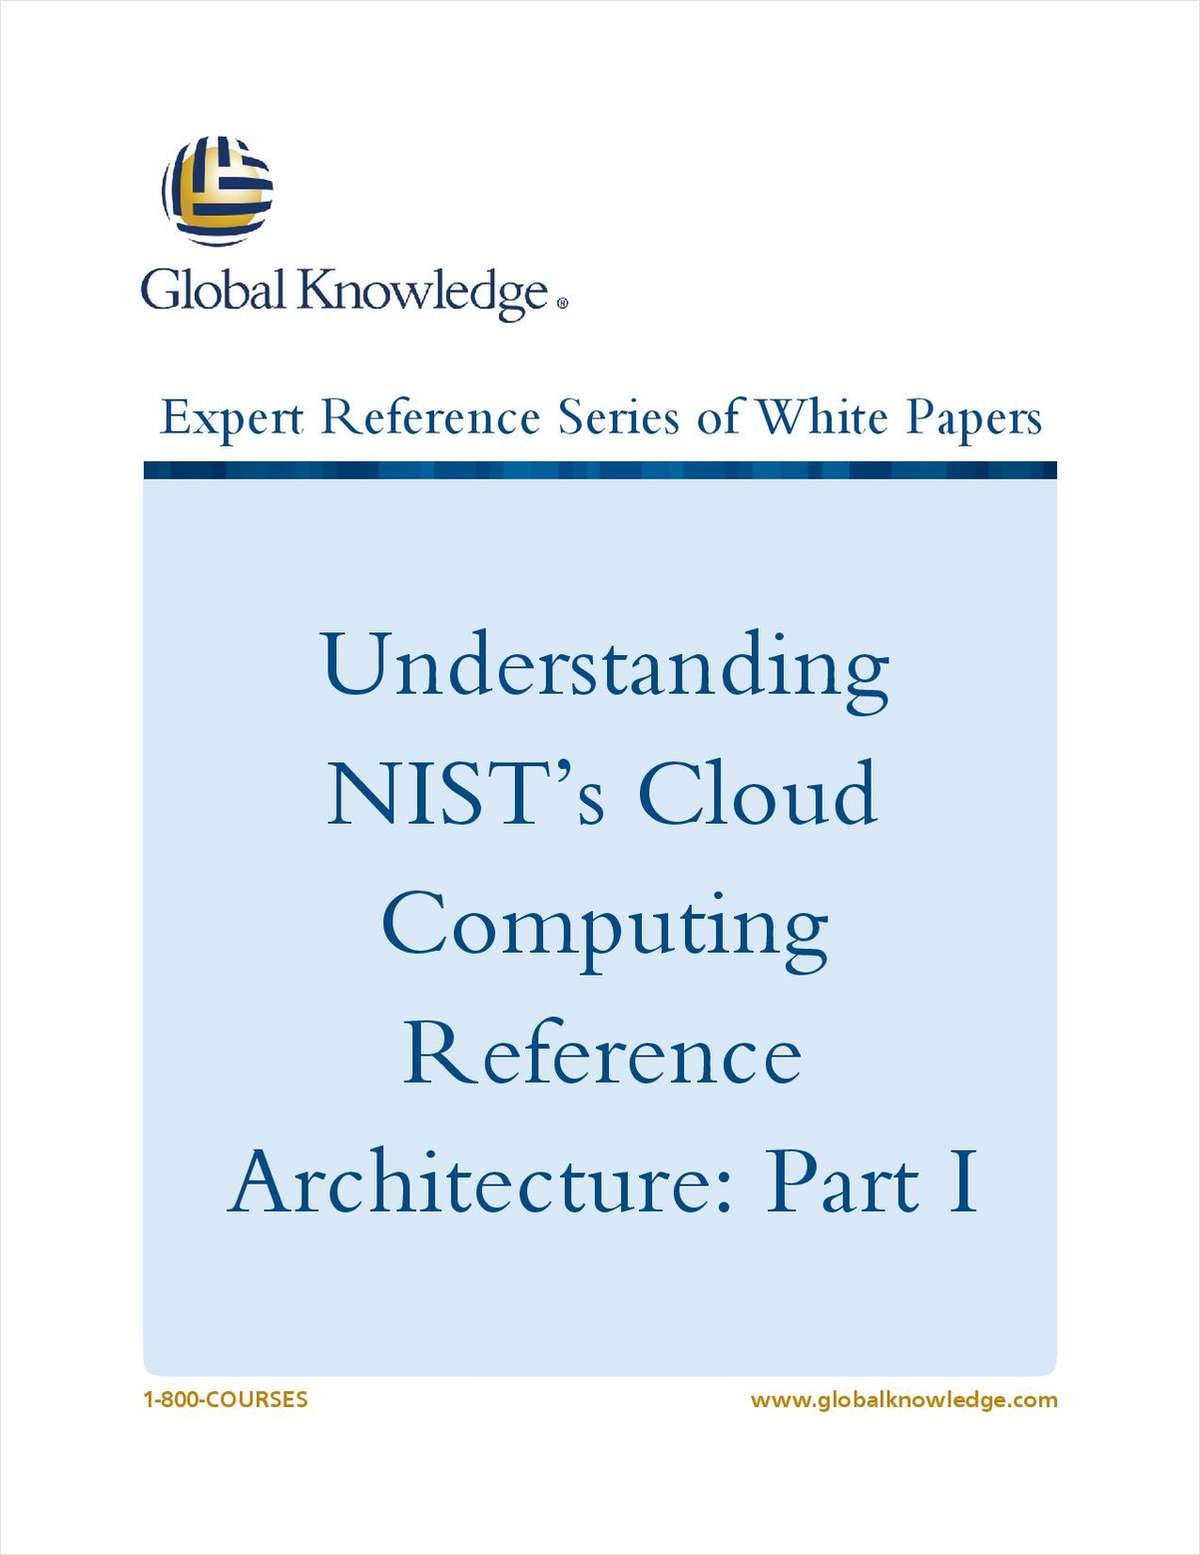 Understanding NIST's Cloud Computing Reference Architecture: Part I